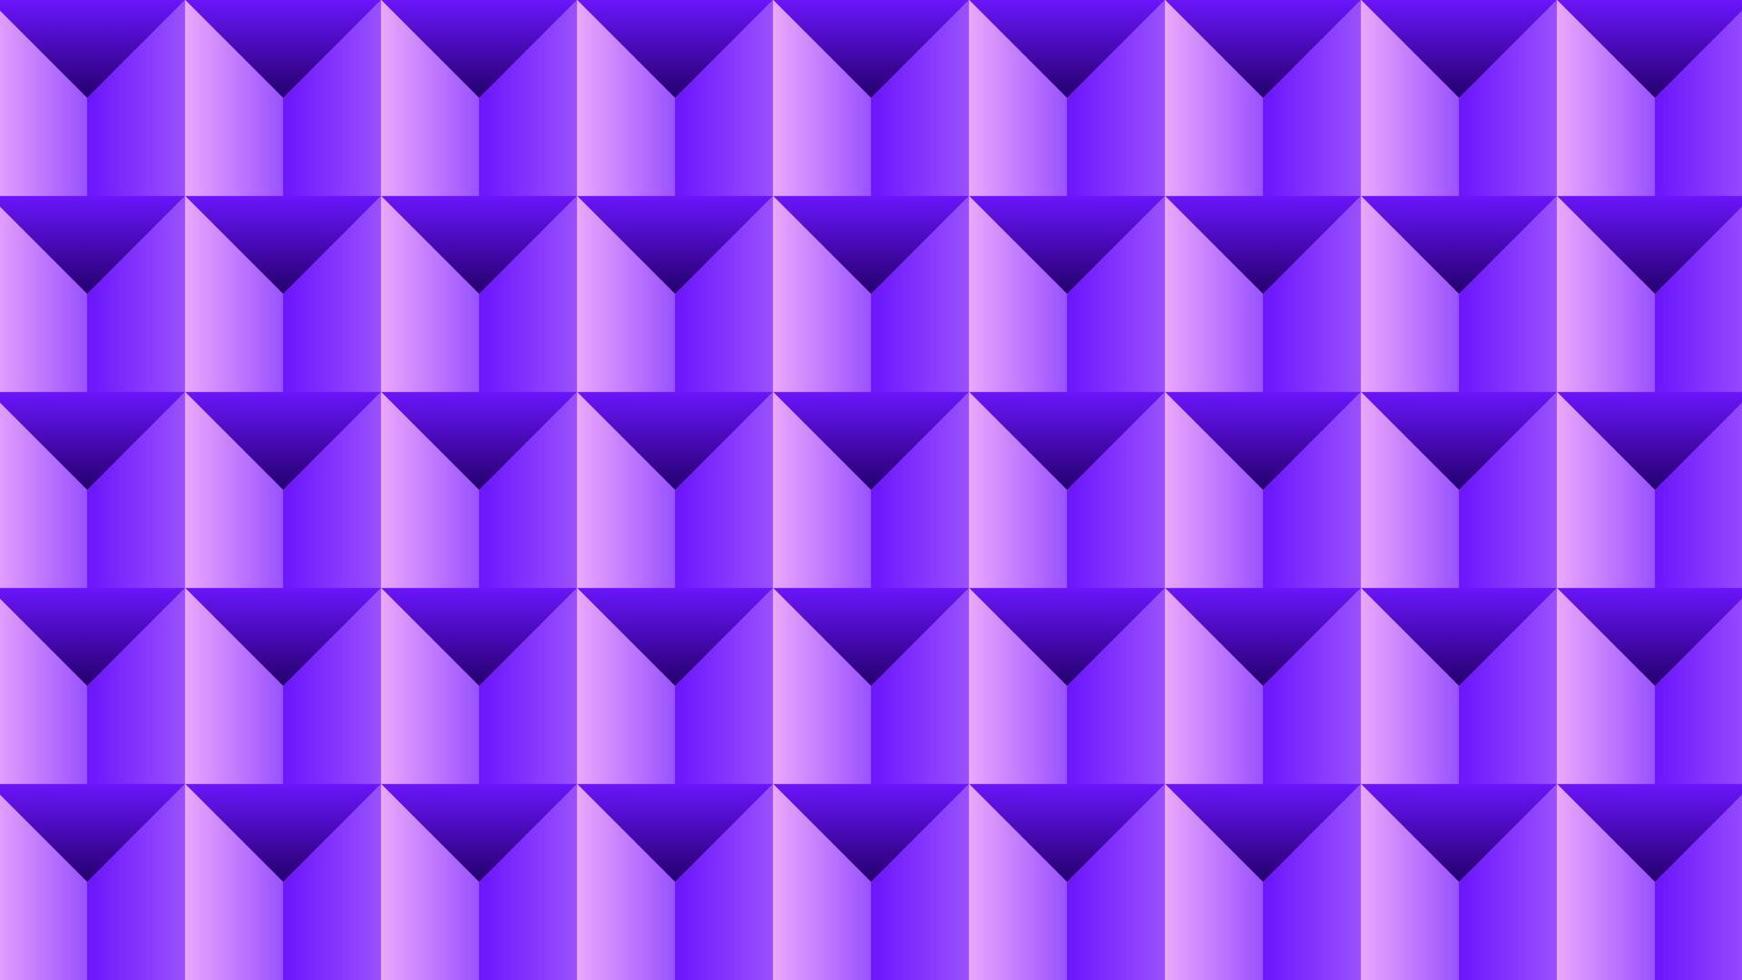 Pattern of 3d optical illusion. Pattern of illusion pyramid. Vector illustration of 3d purple triangle. Geometric illusive for design graphic, background, wallpaper, layout or art